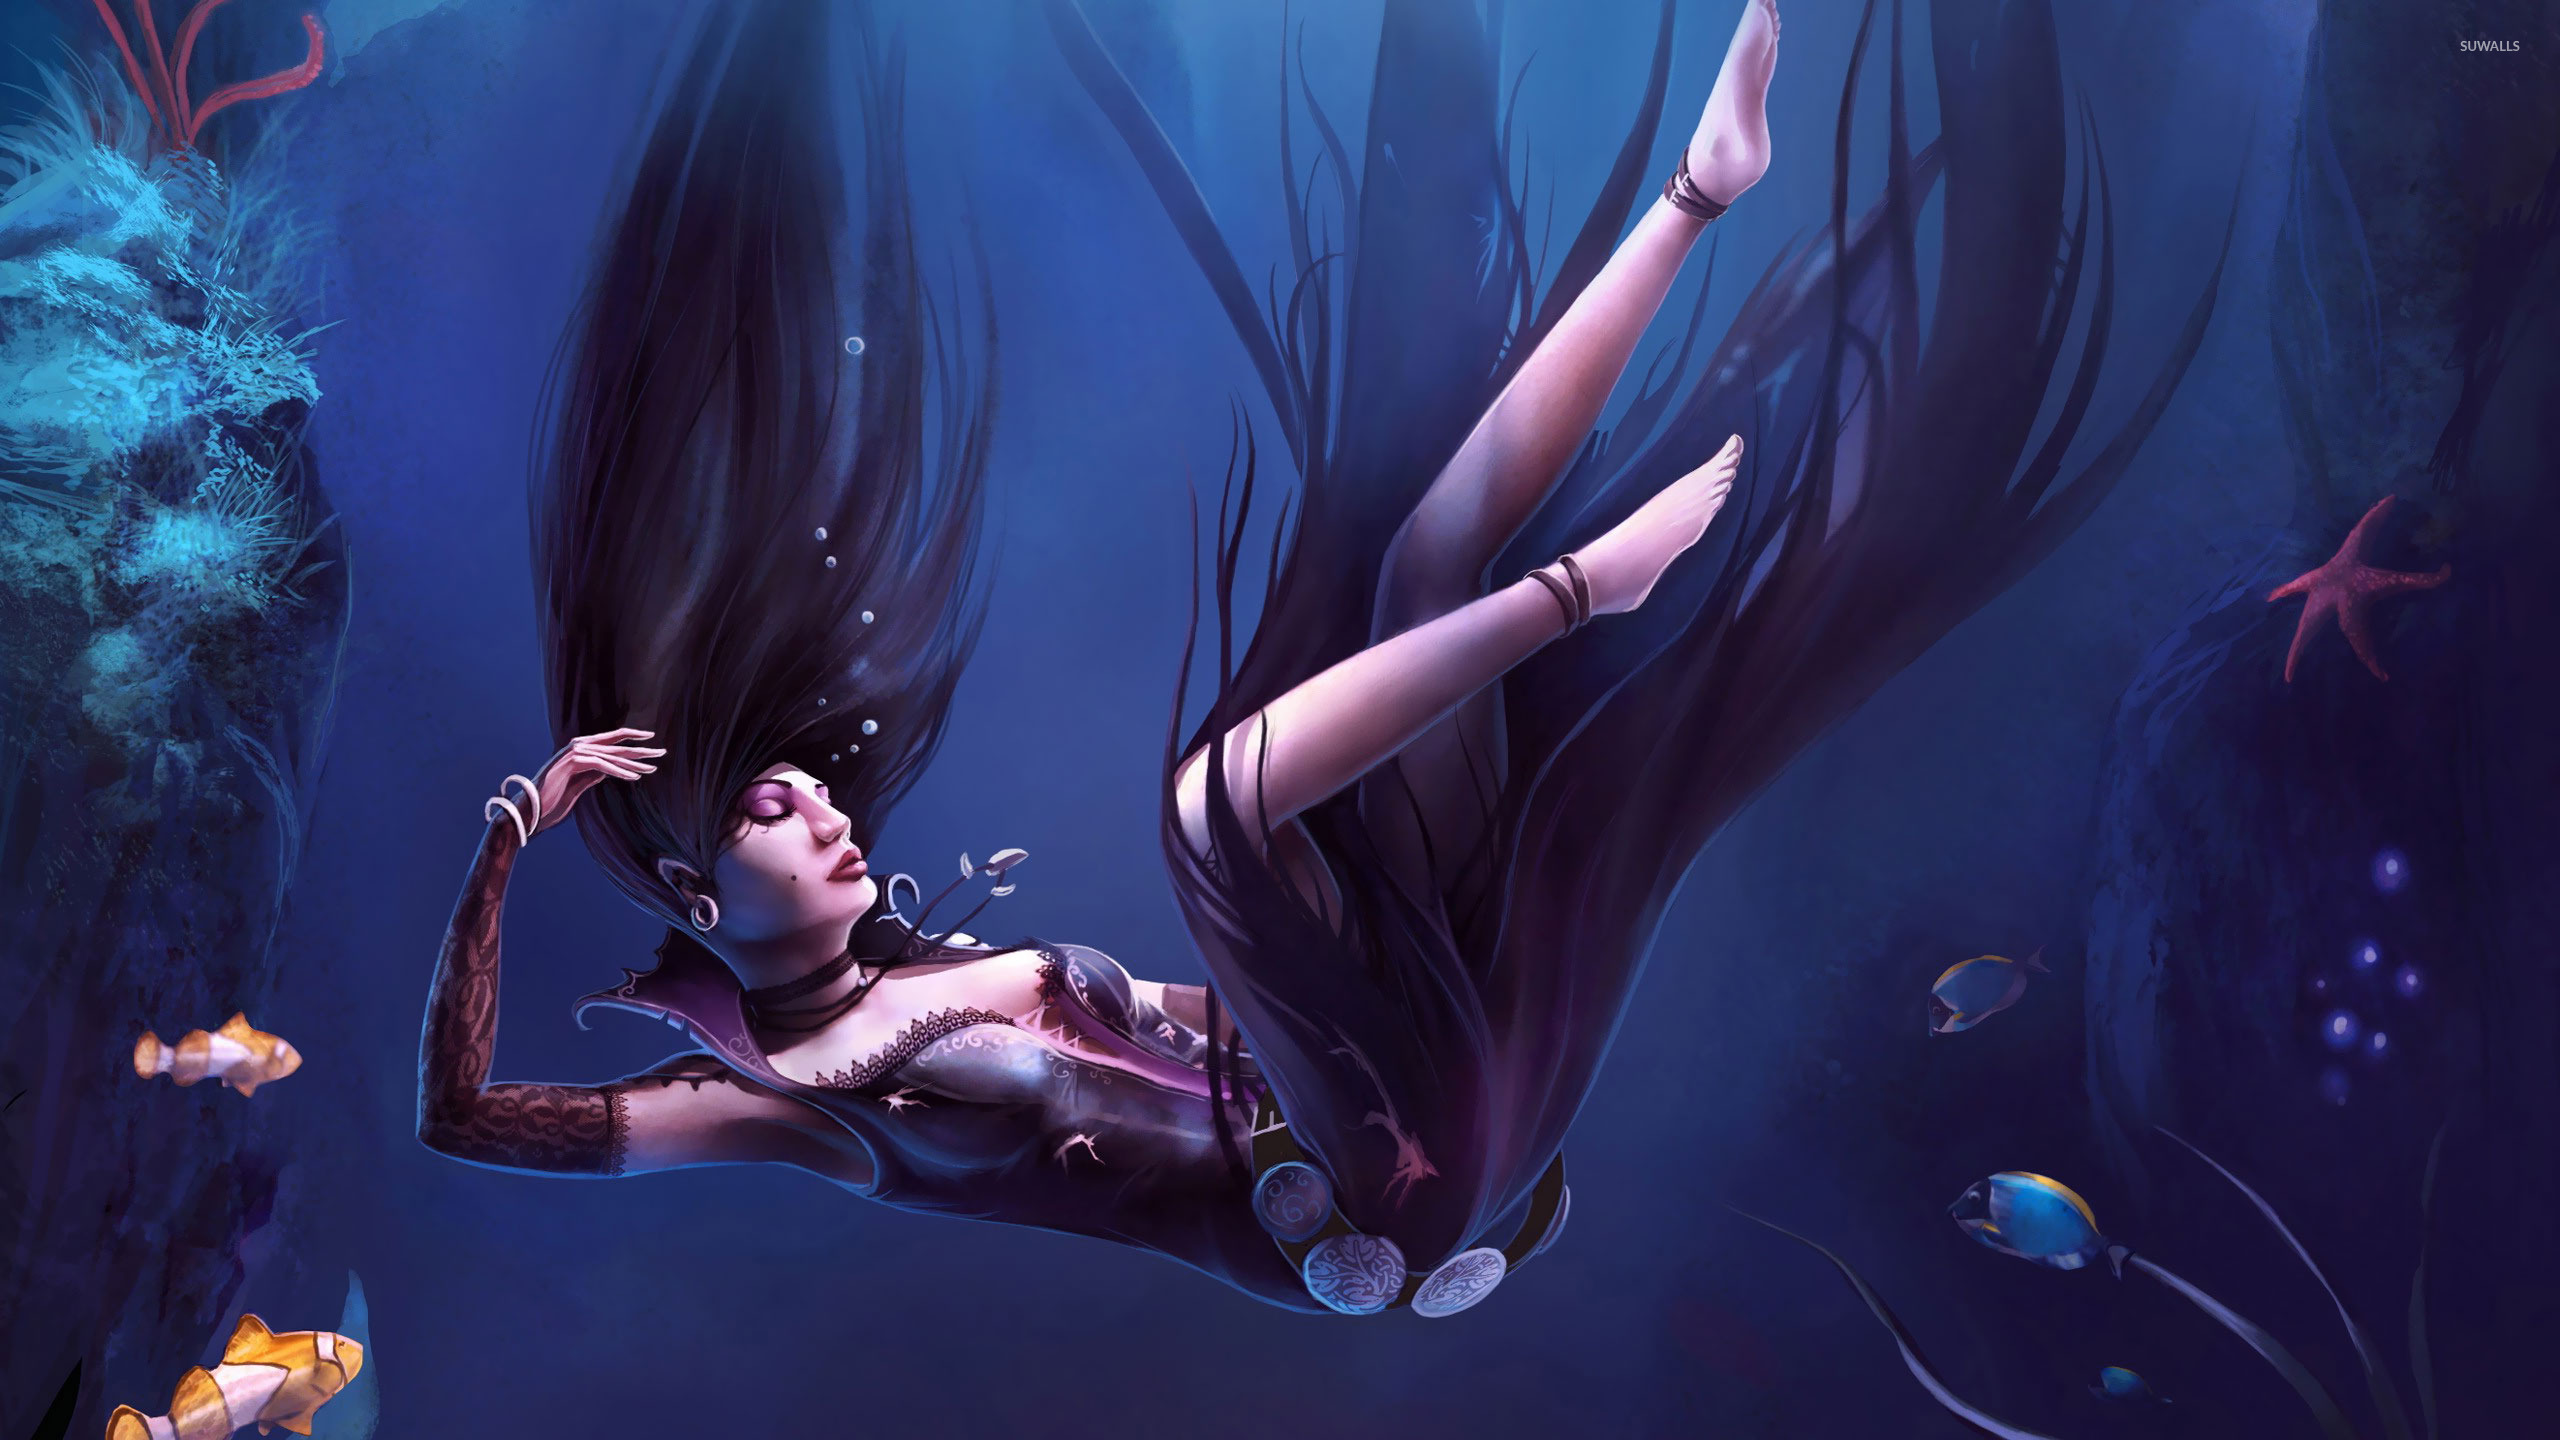 Drowning in Blue Wallpaper  1080p by MagicXB on DeviantArt